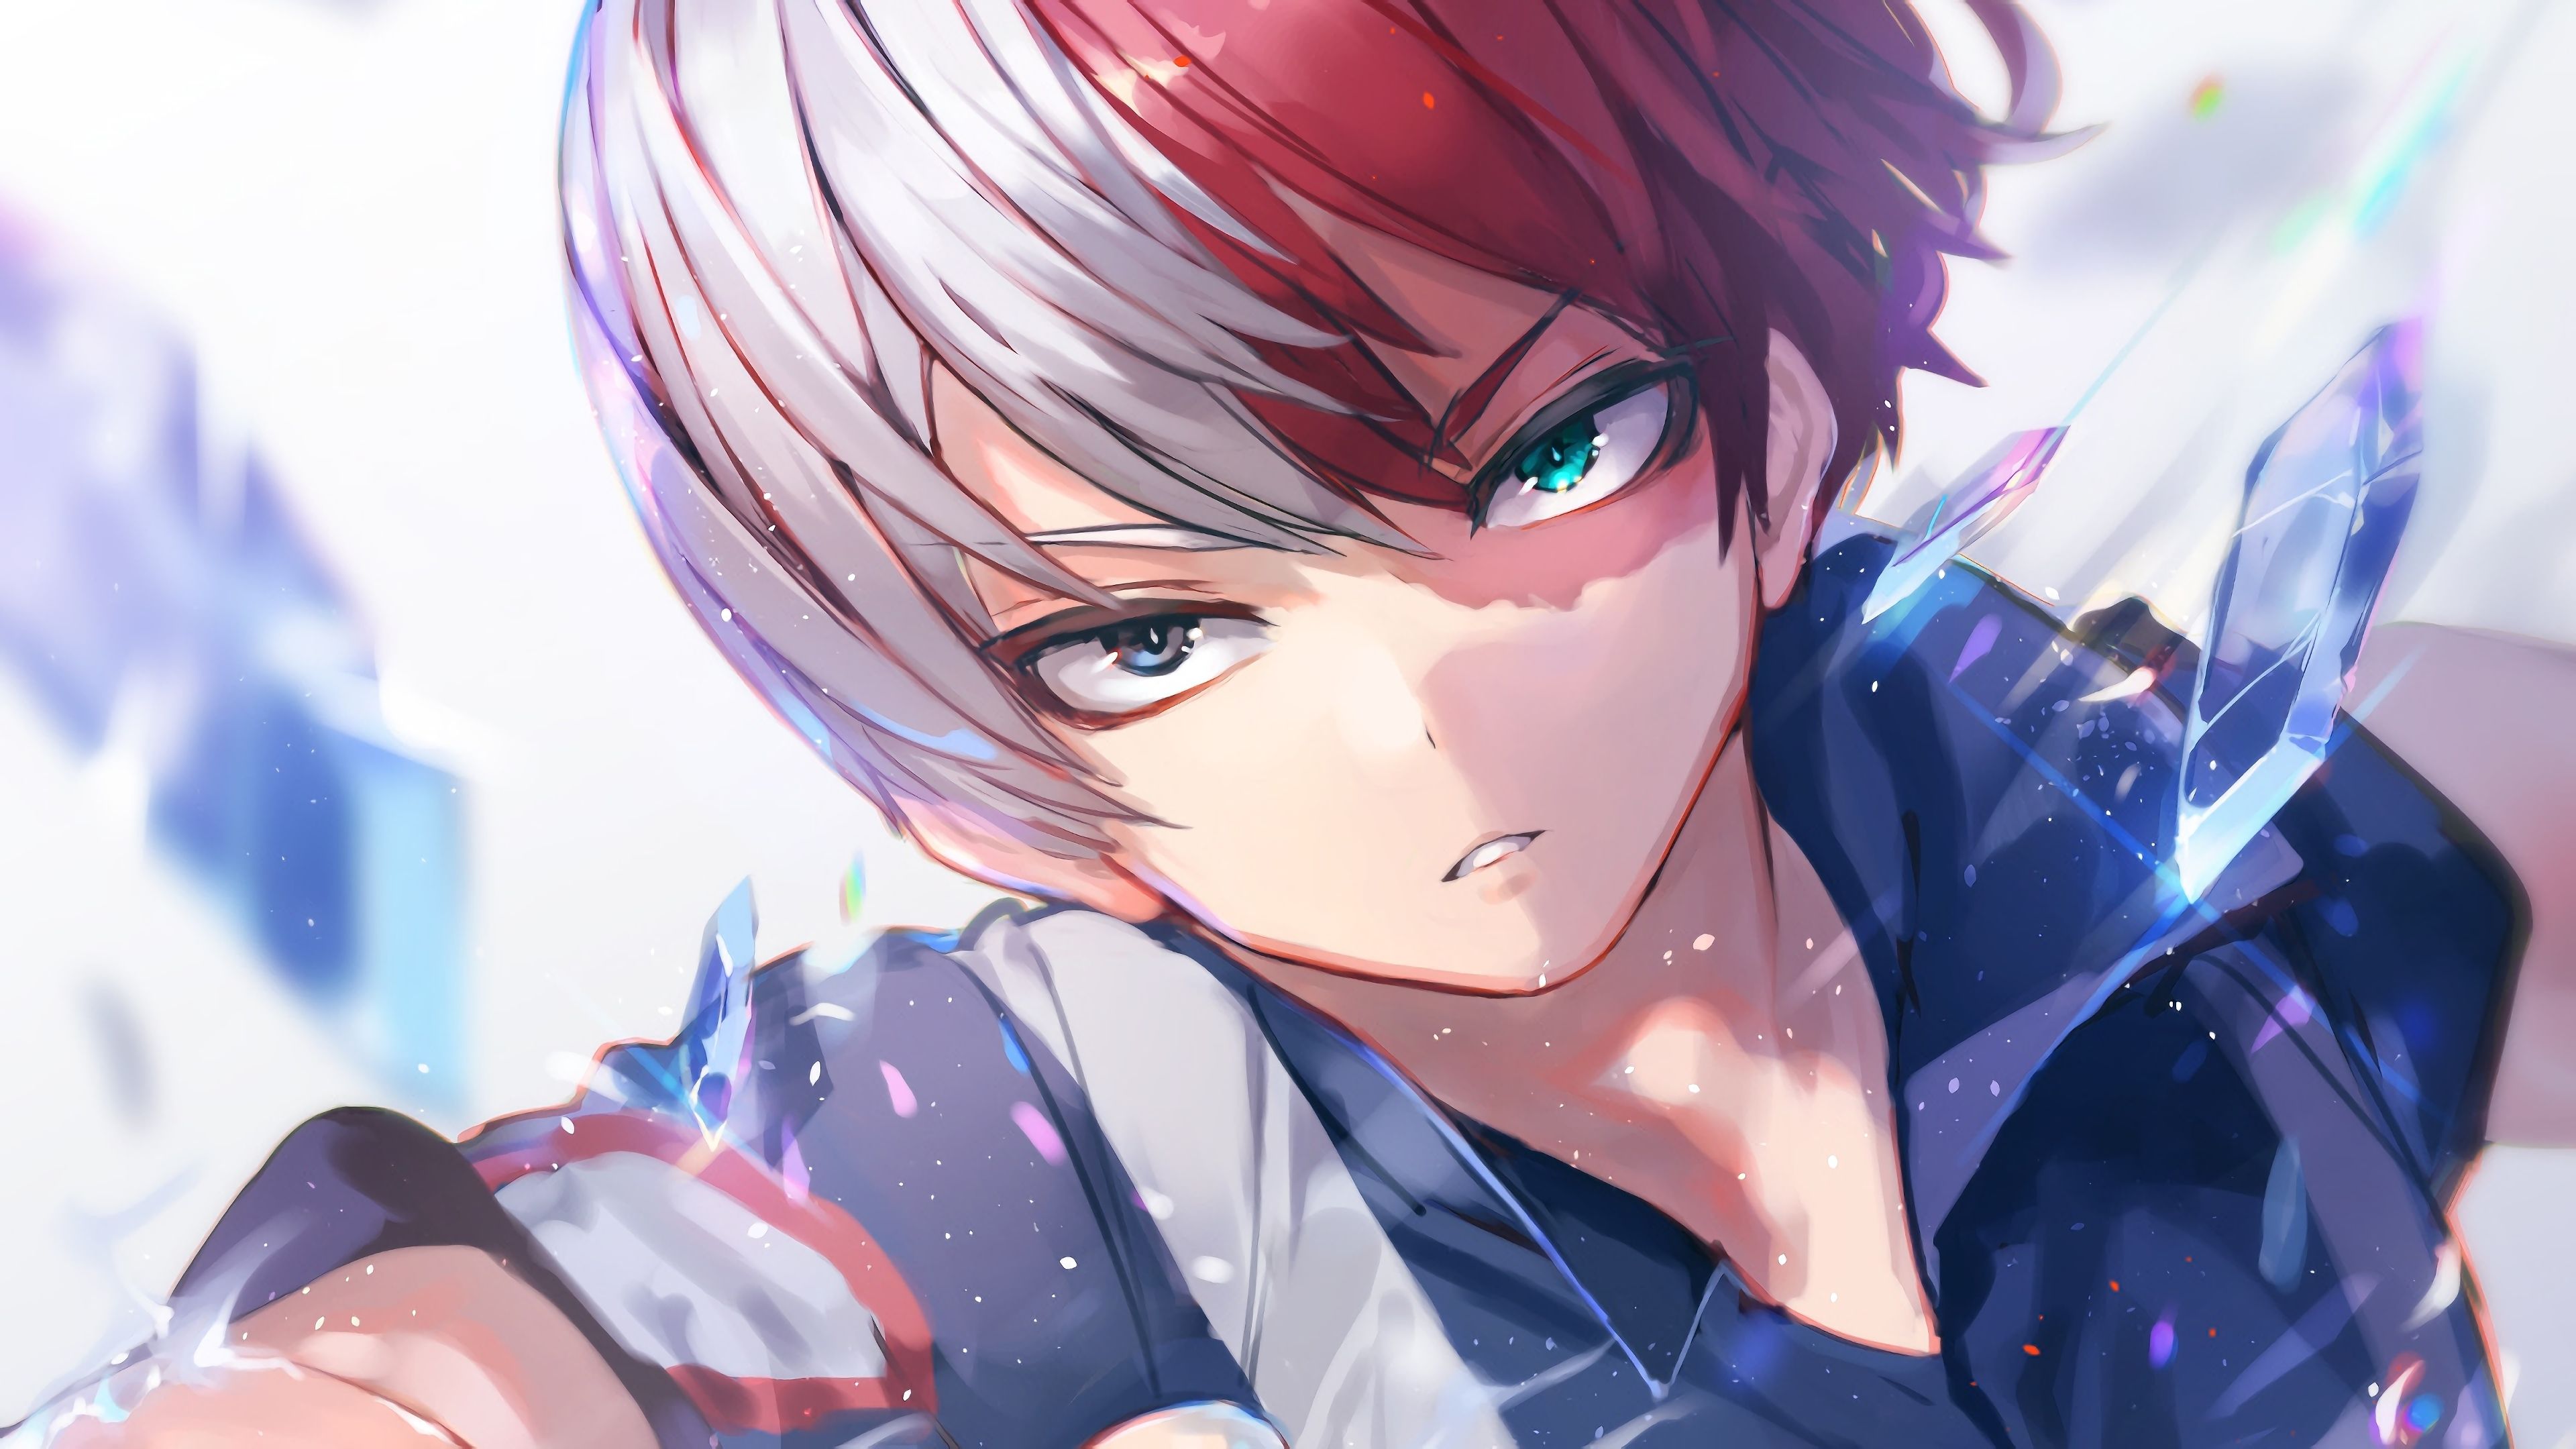 Anime Boy Red And White Hair Wallpapers - Wallpaper Cave